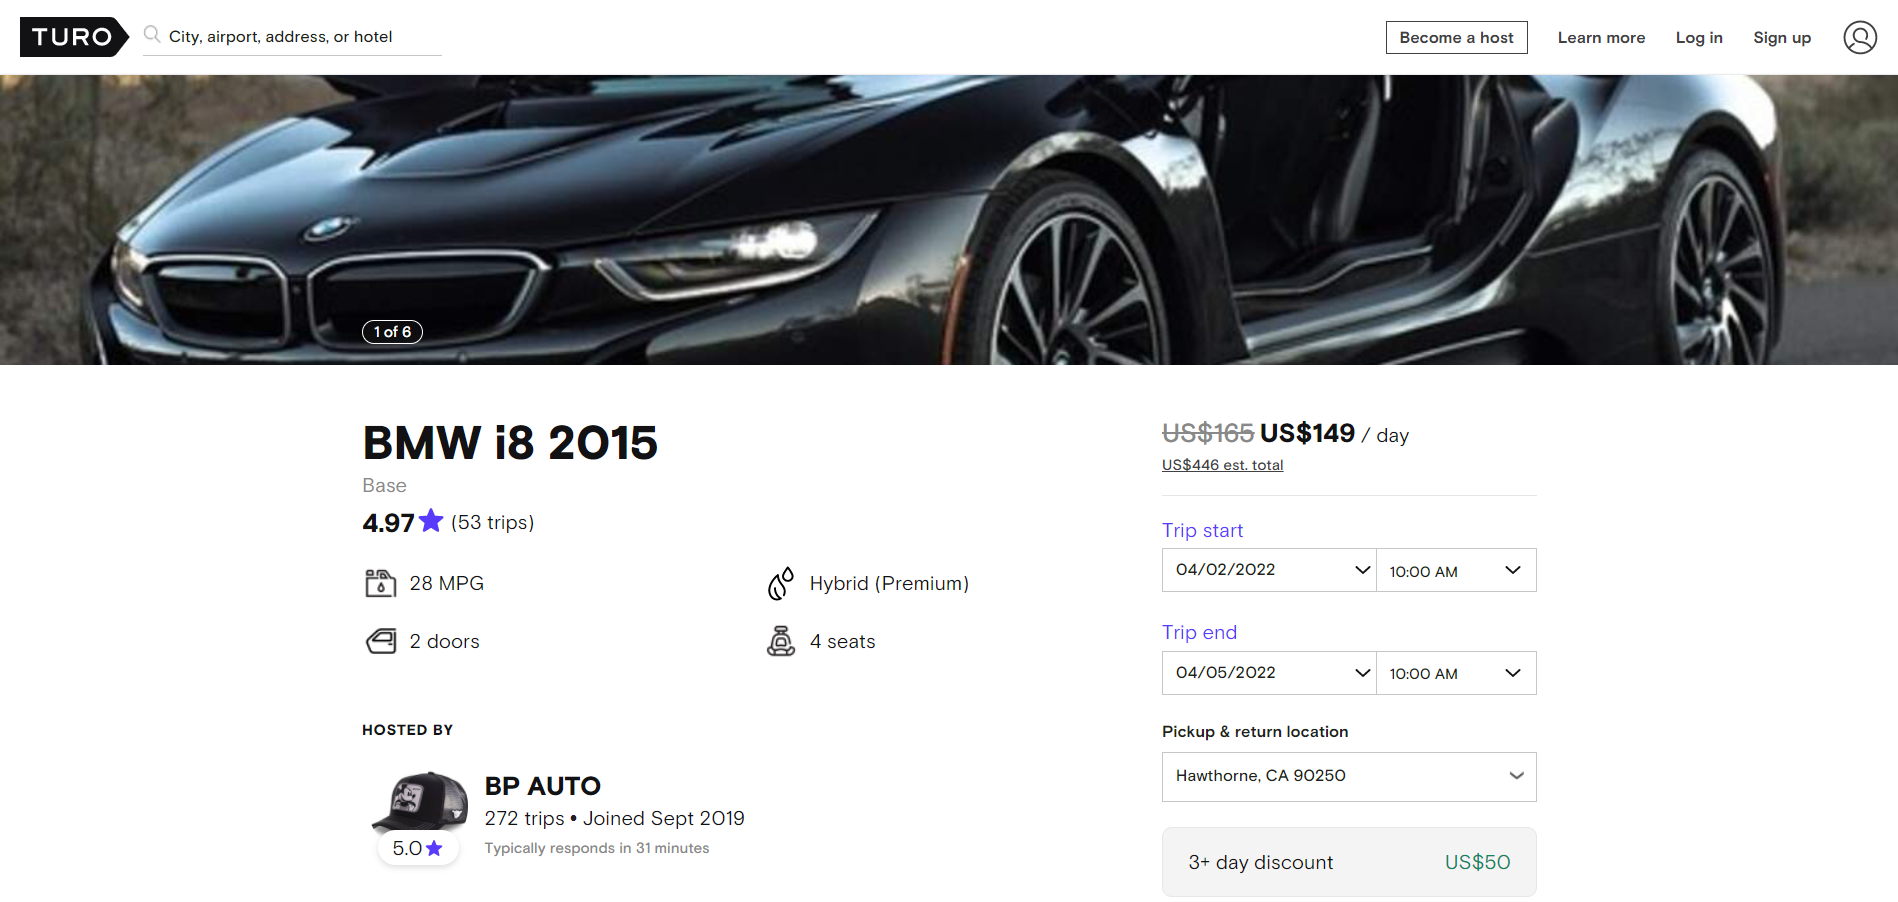 An example of a car listing on Turo